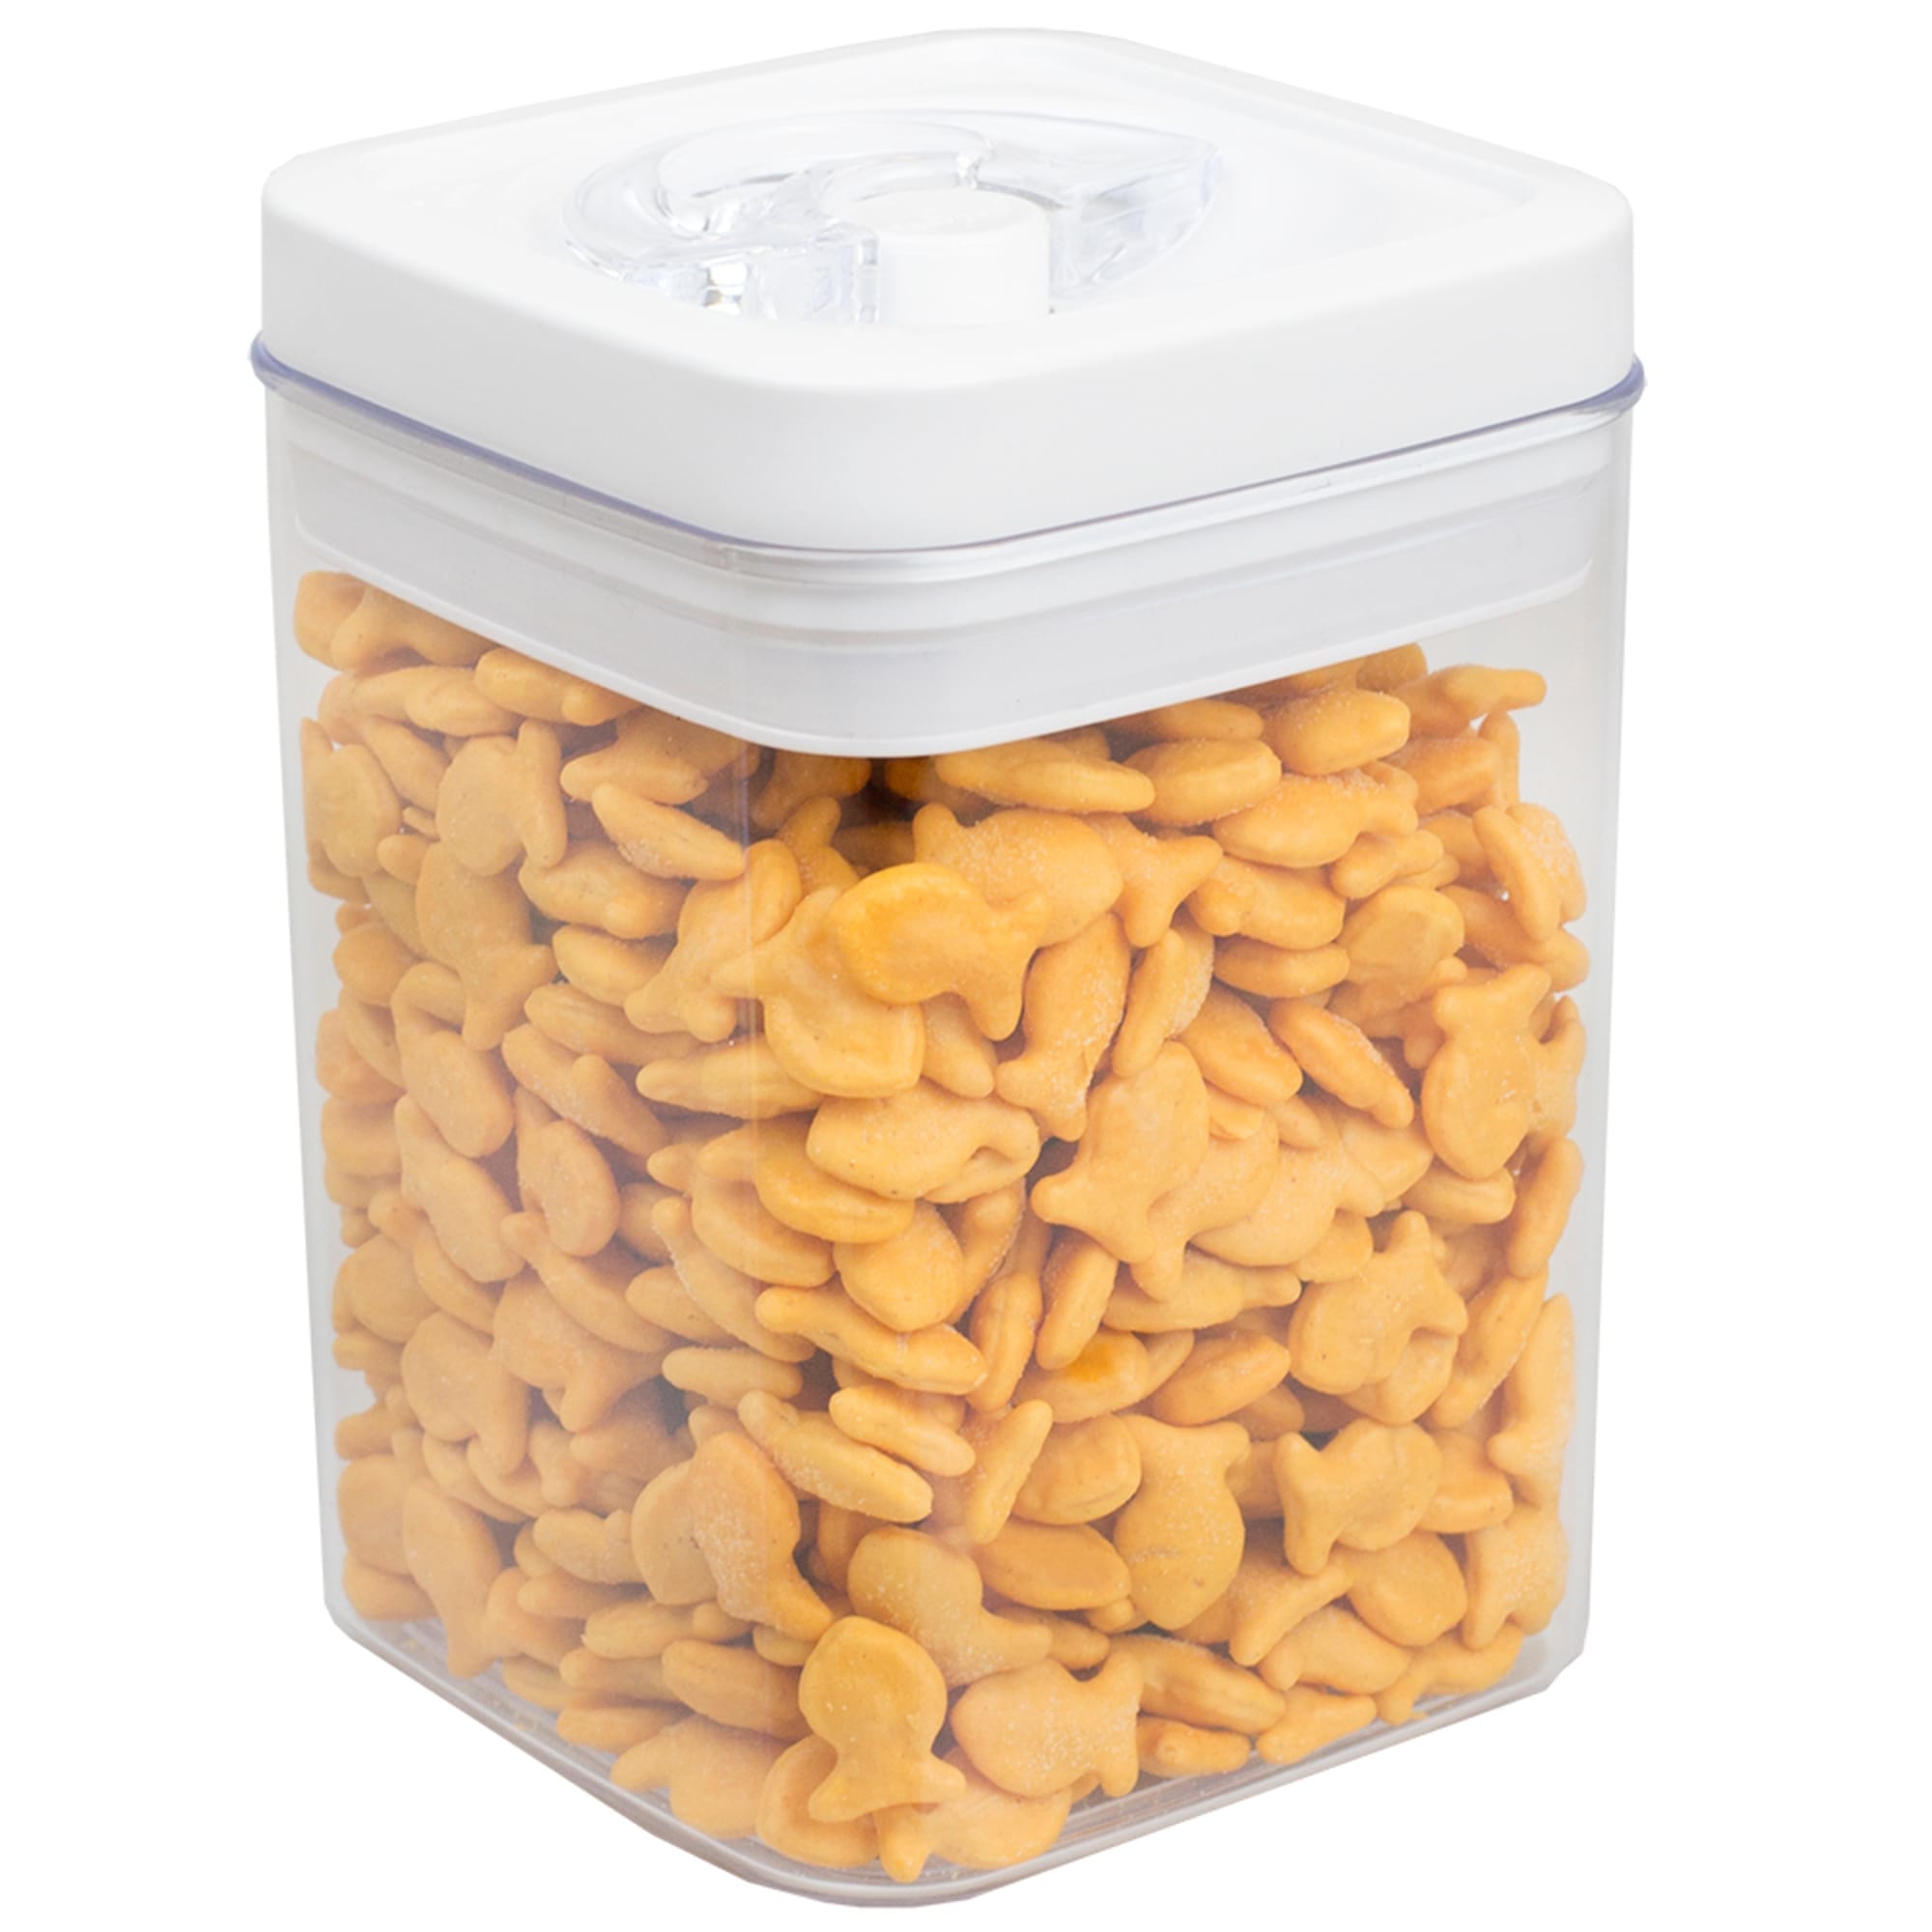 Home Basics 1.7 Liter Twist 'N Lock Air-Tight Square Plastic Canister, White $5.00 EACH, CASE PACK OF 6